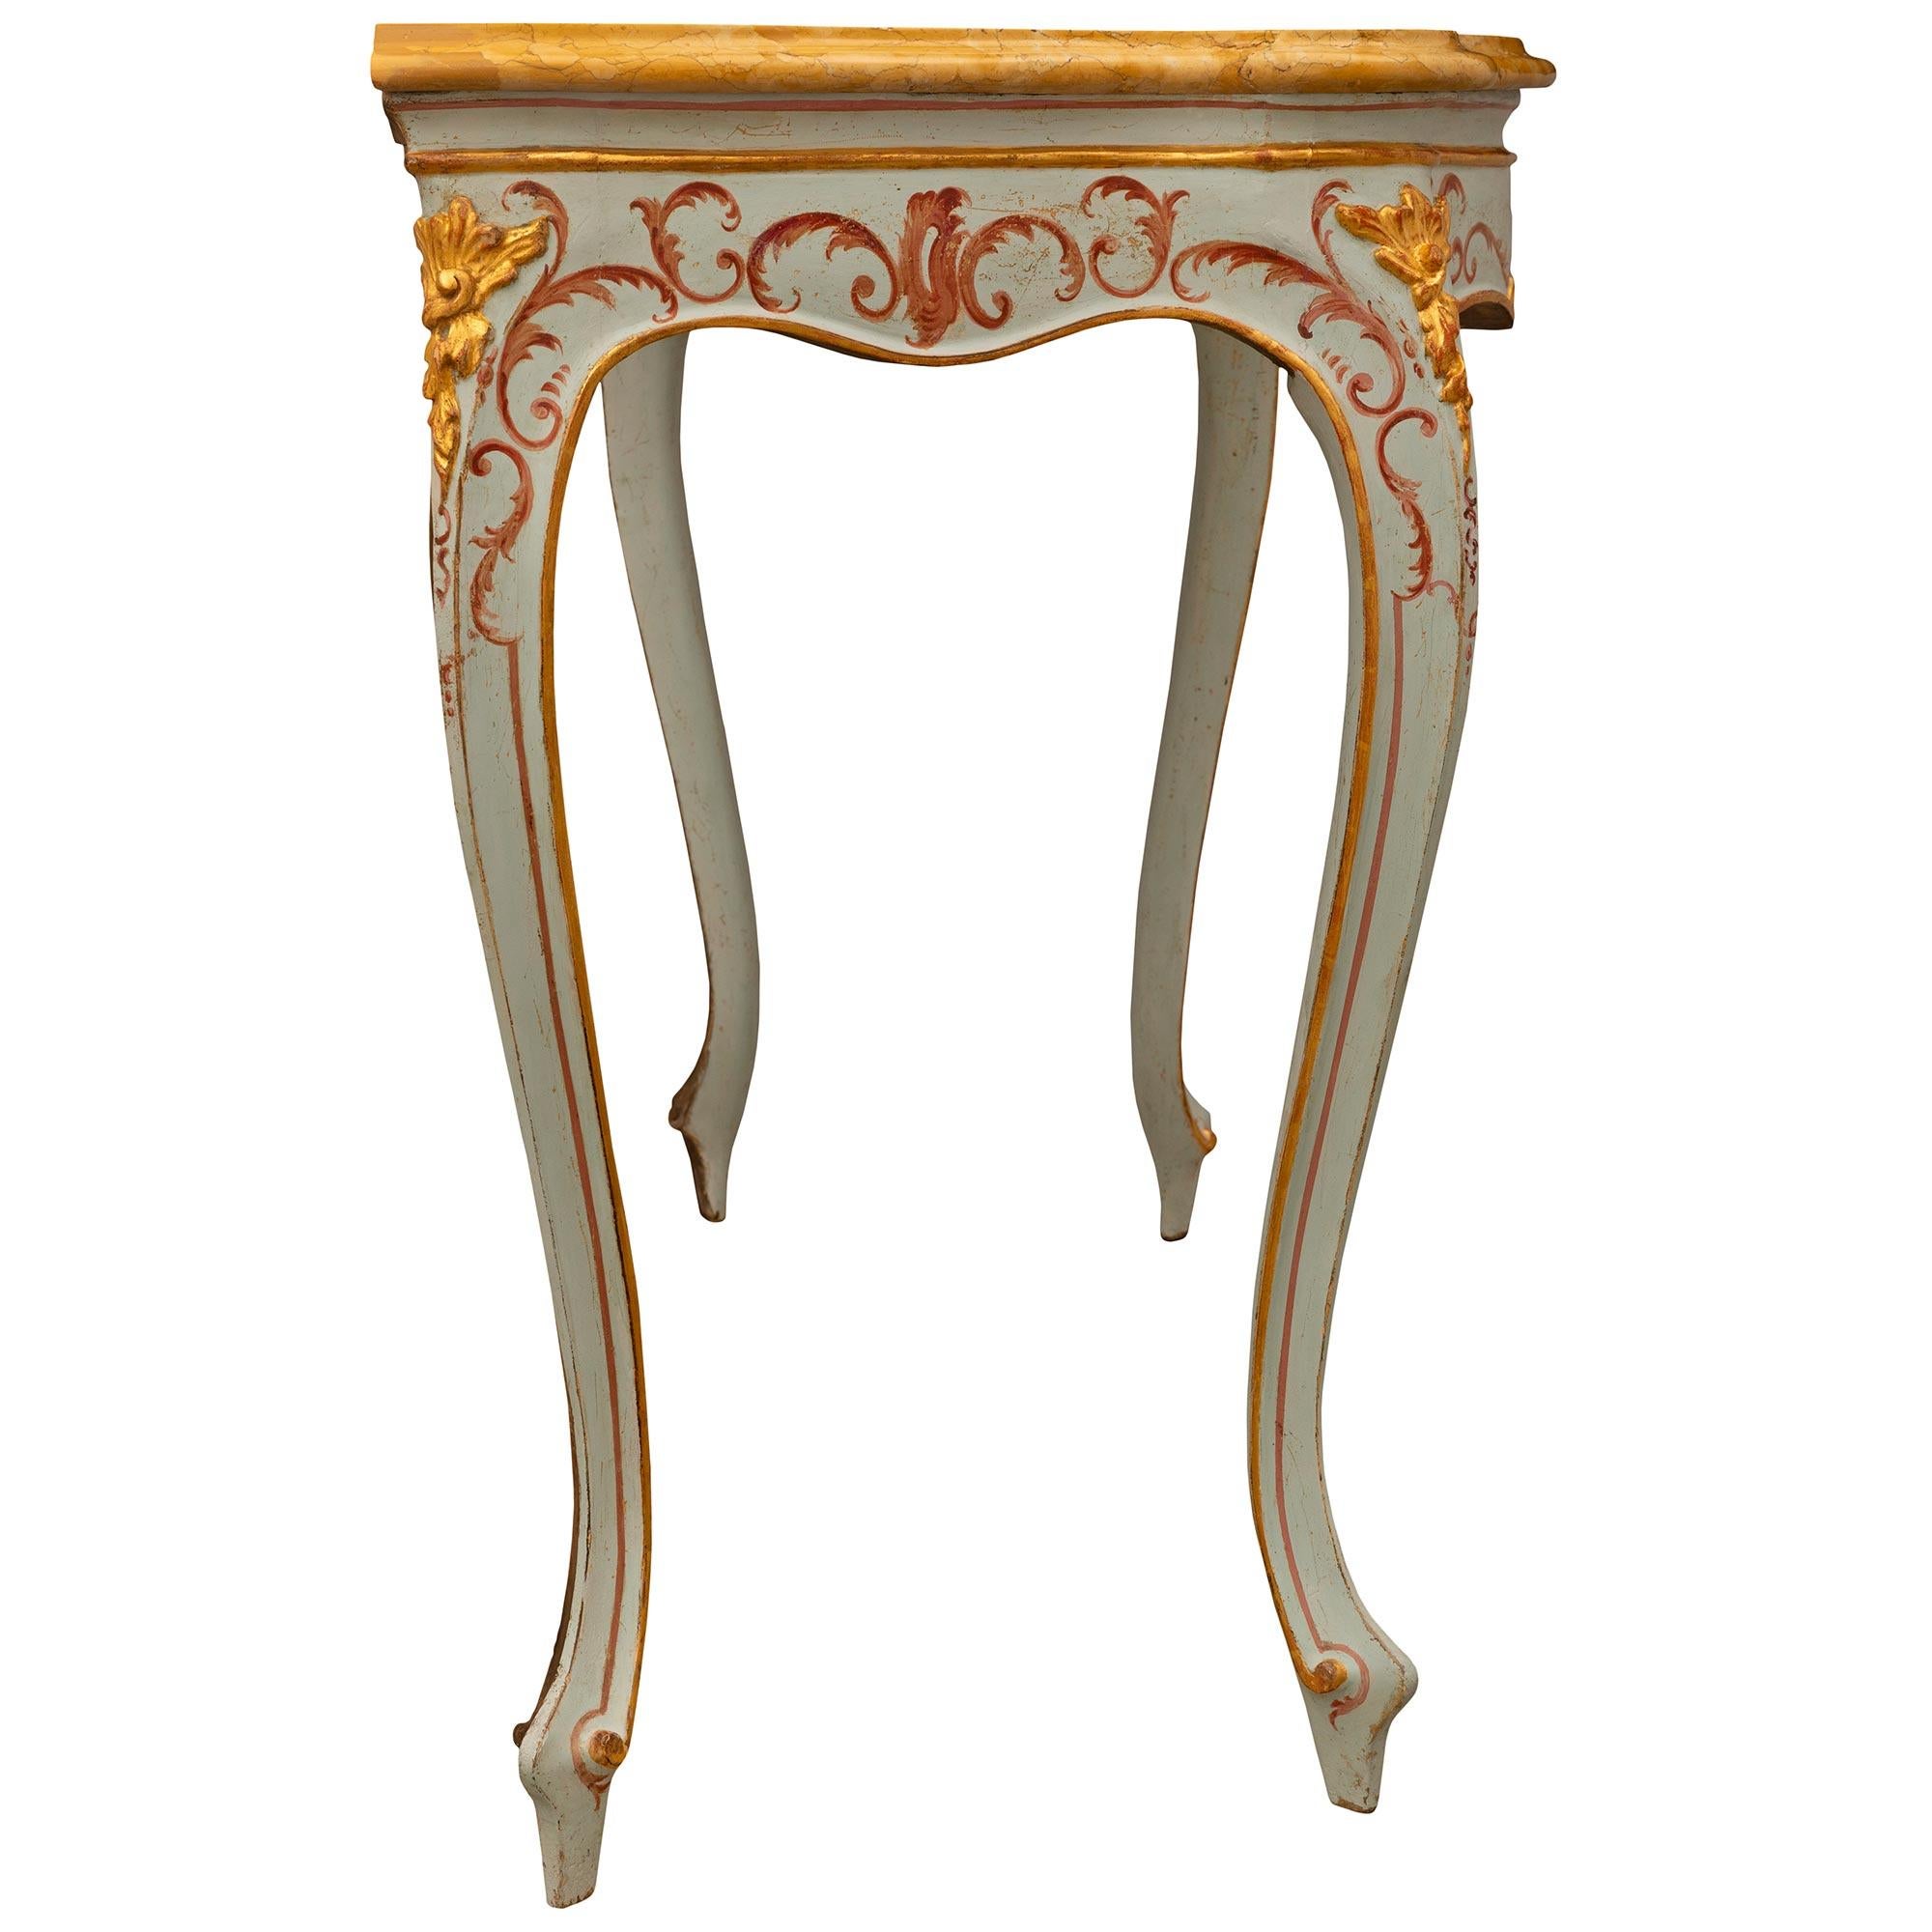  Pair Of Italian 18th c. Venetian St. Giltwood, Patinated Wood & Marble Consoles For Sale 1